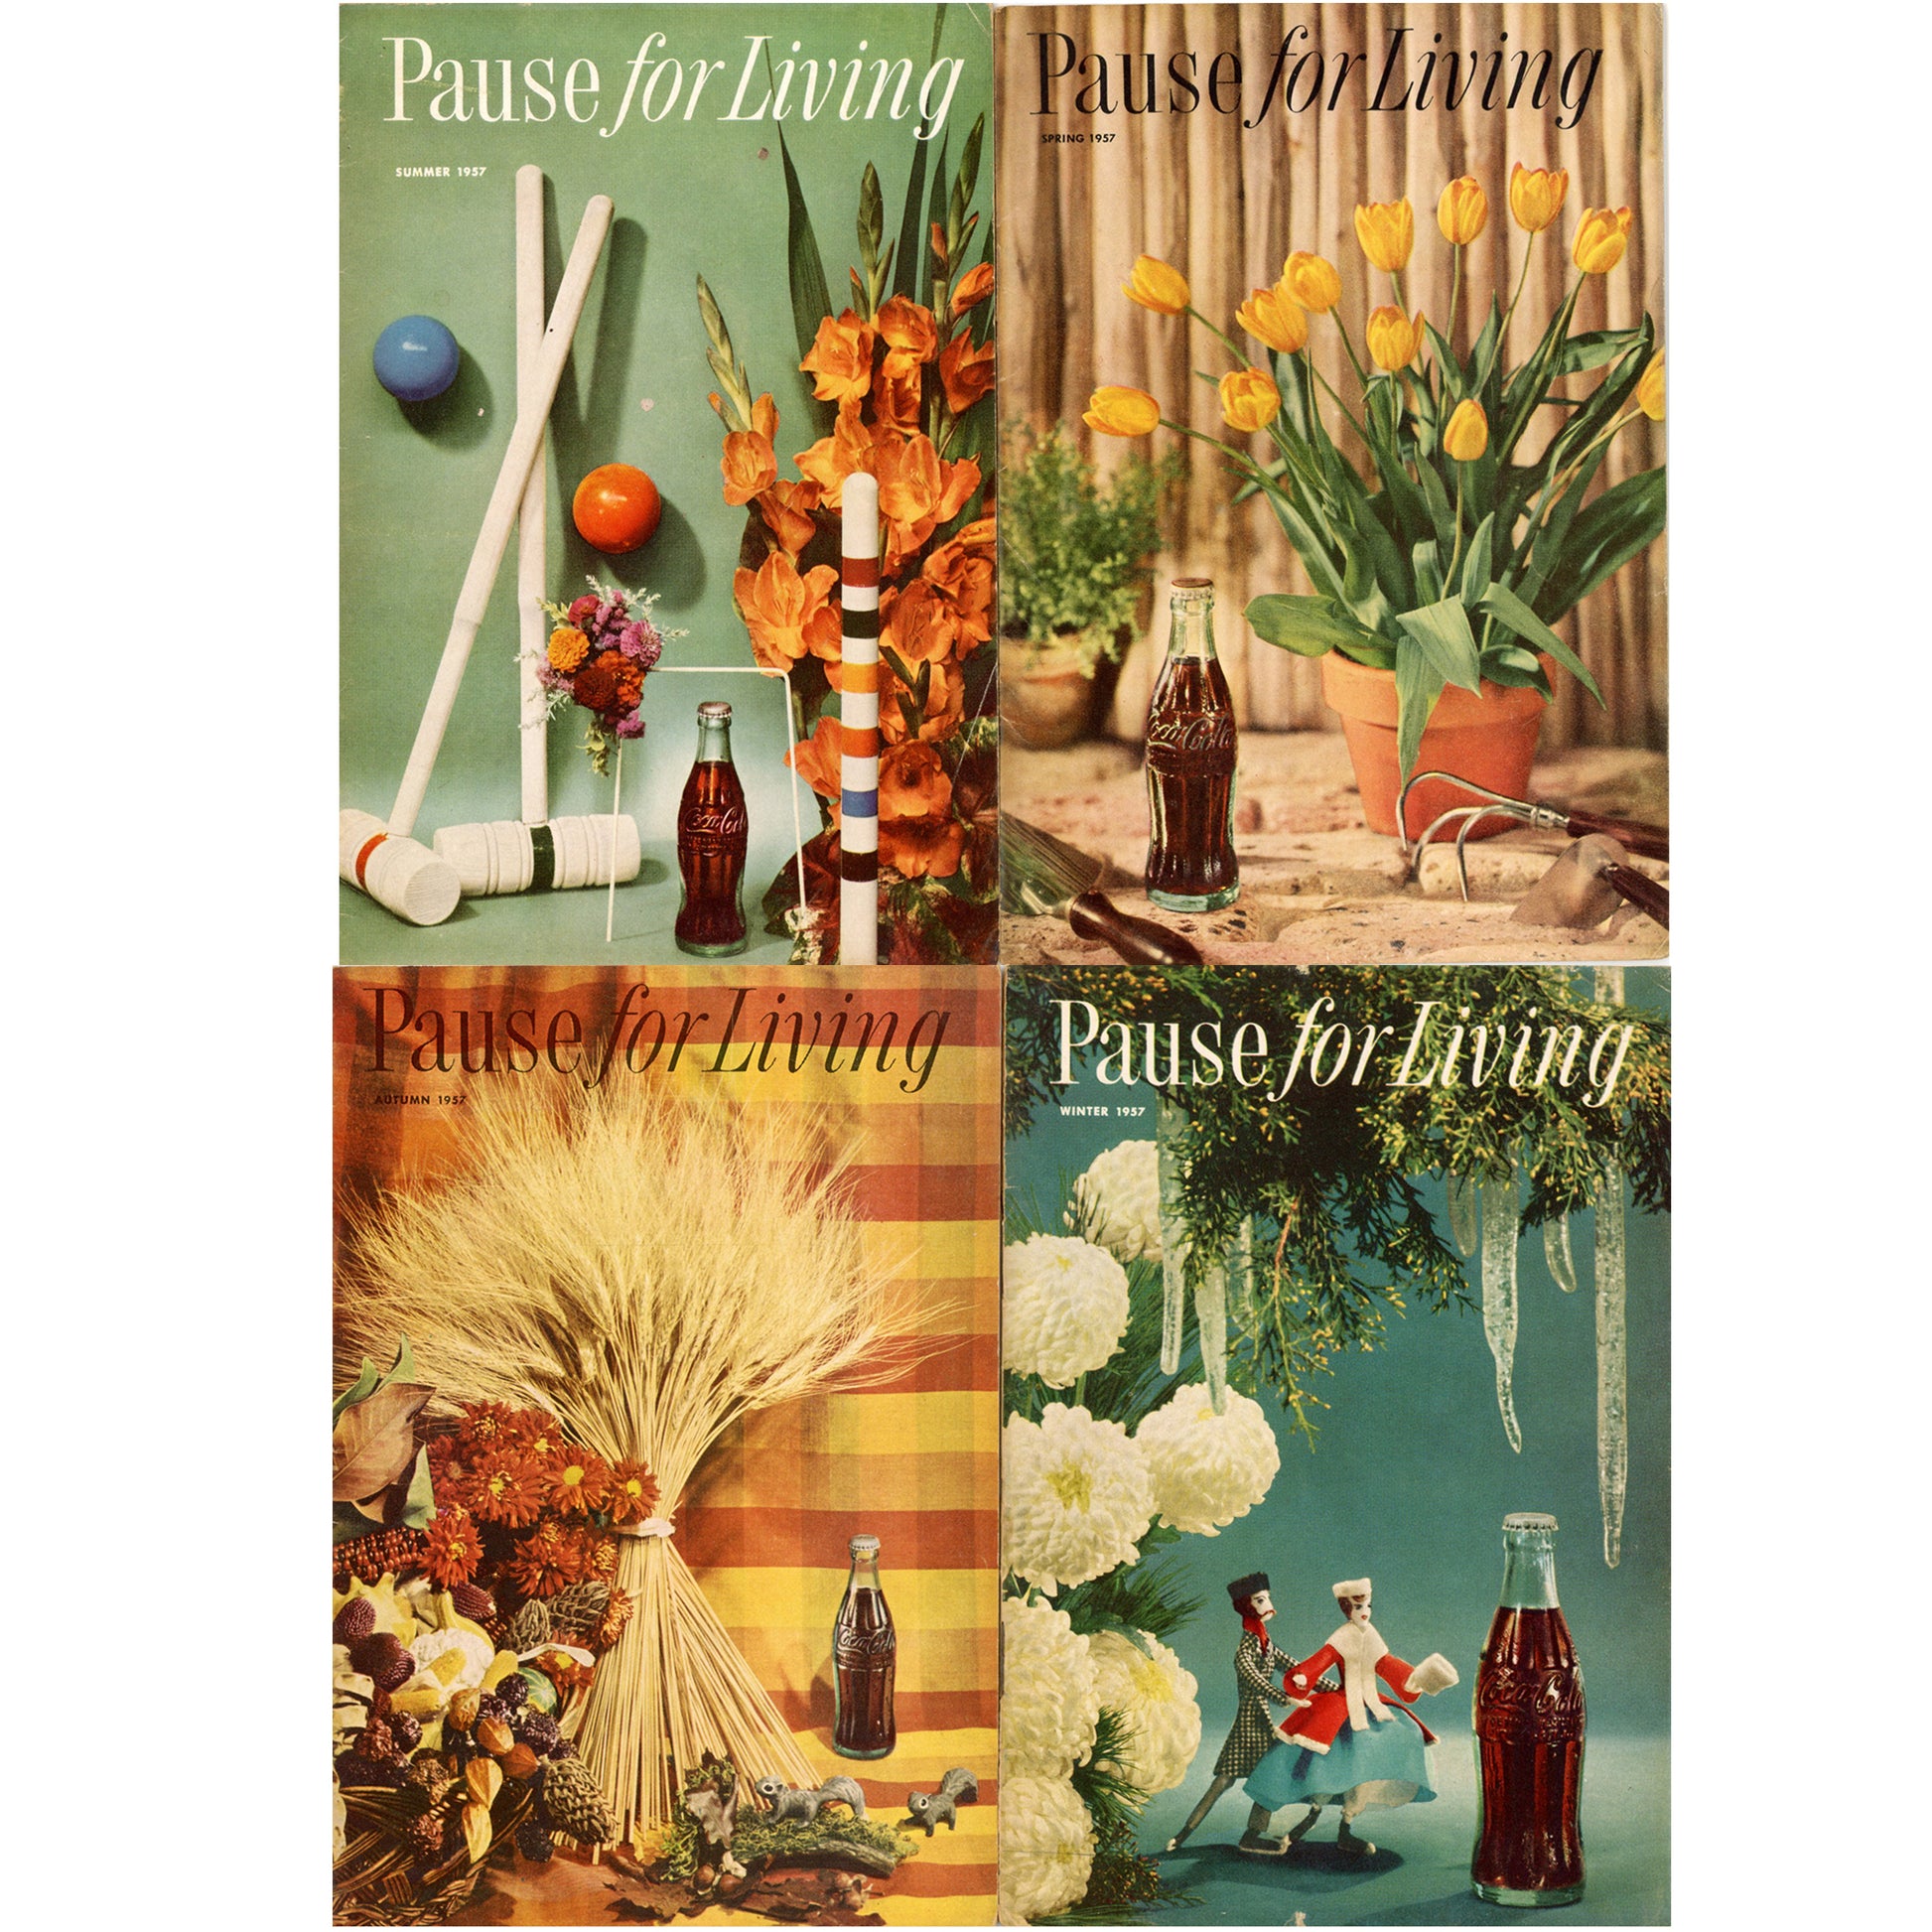 PAUSE FOR LIVING Seasonal Entertaining Booklets by Coca Cola Full Set from 1957